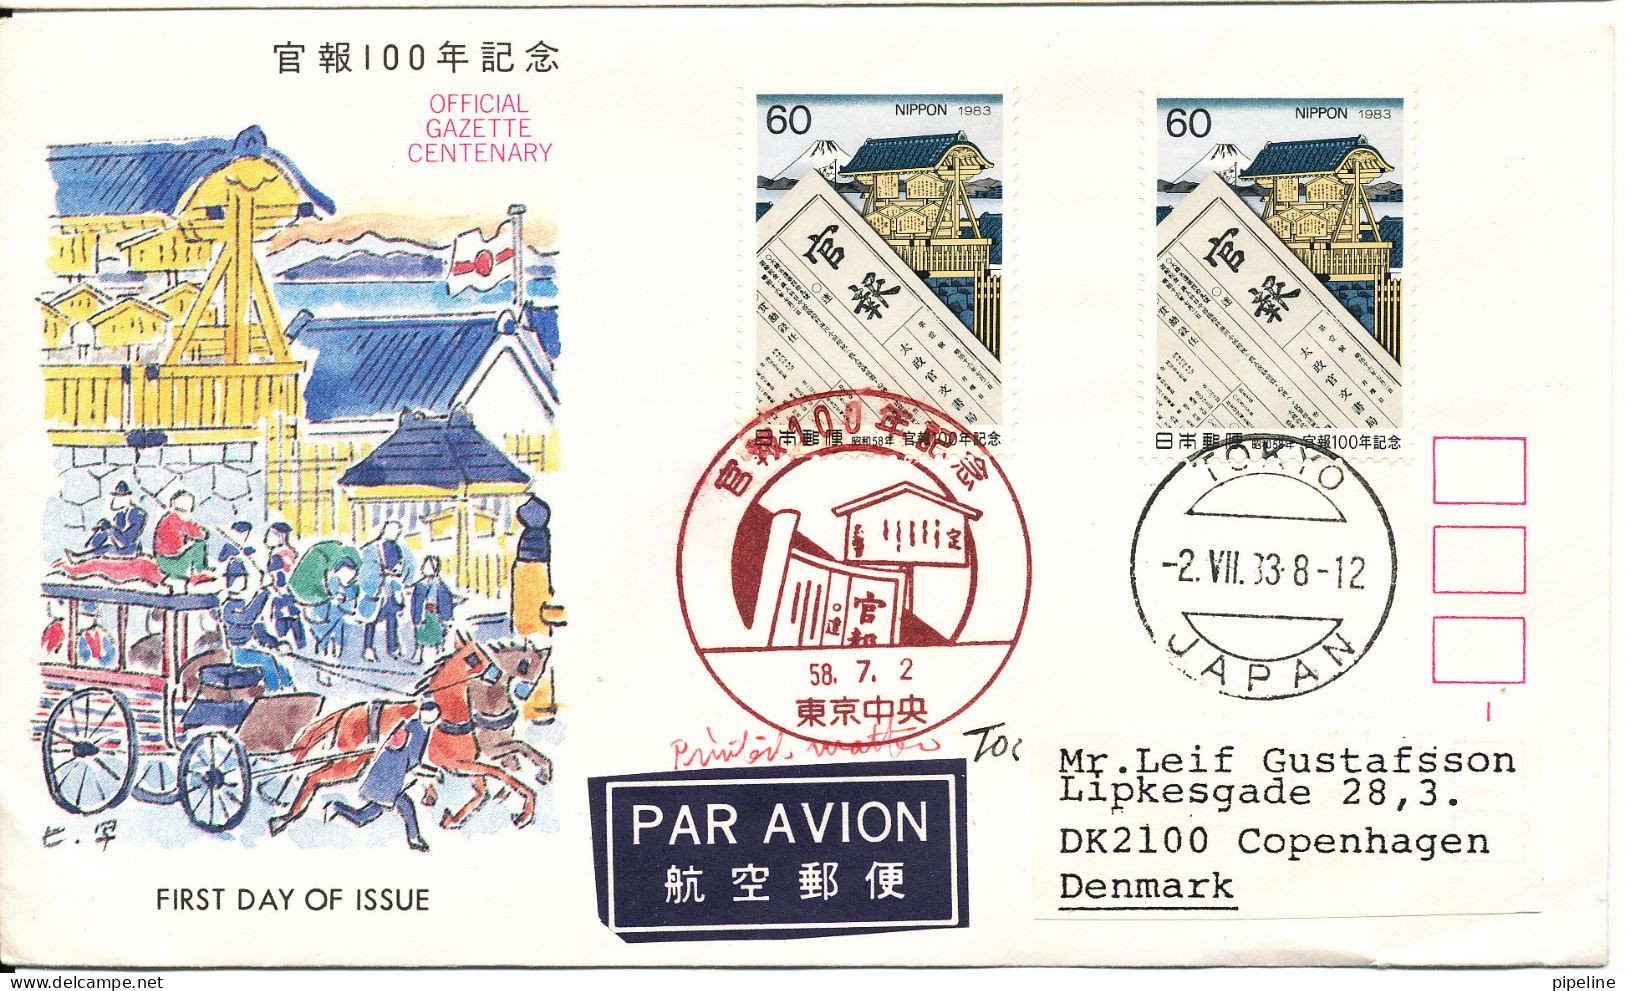 Japan FDC 2-7-1983 Official Gazette Centenary With Cachet And Sent To Denmark - FDC